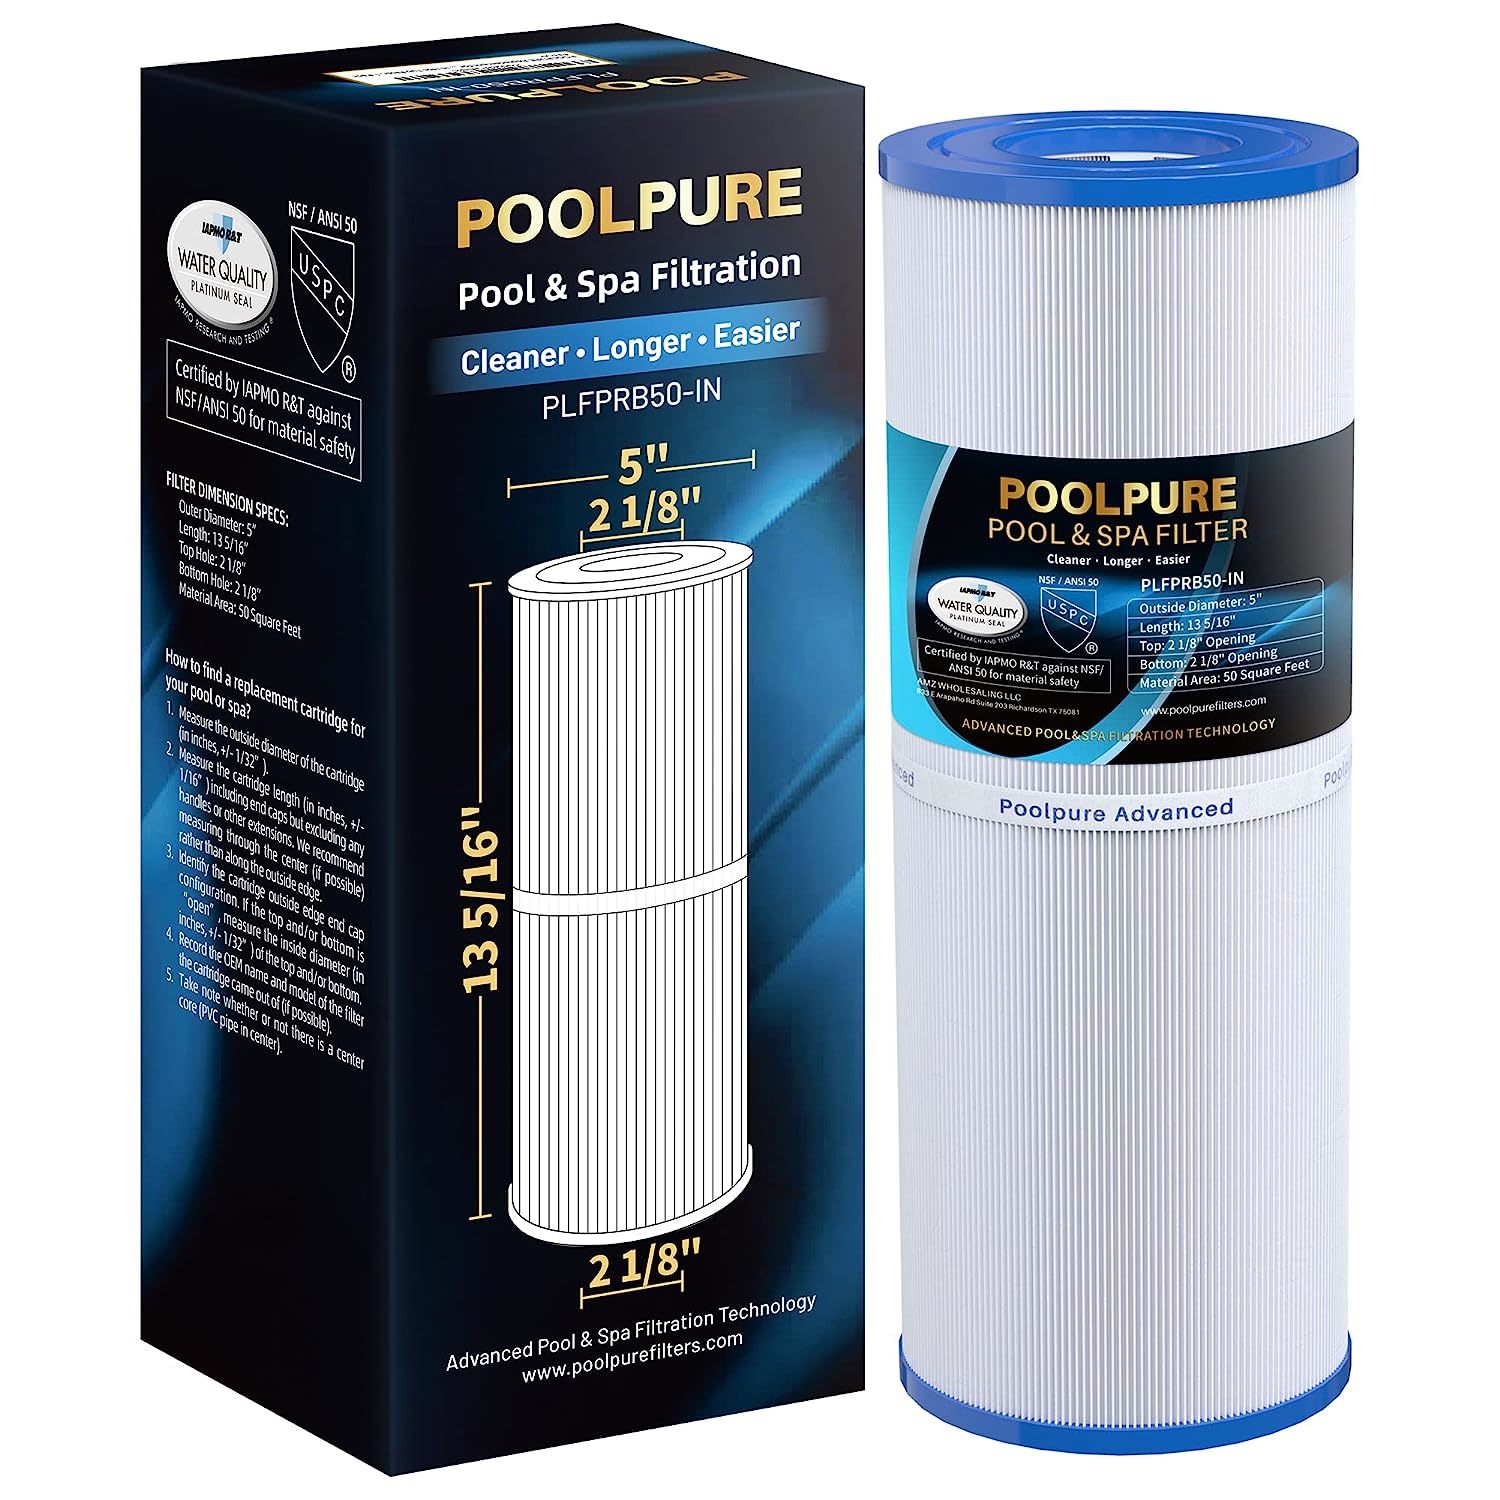 Primary image for Plfprb50-In Spa Filter Replaces Pleatco Prb50-In, Prb50In, Unicel C-4950, Filbur